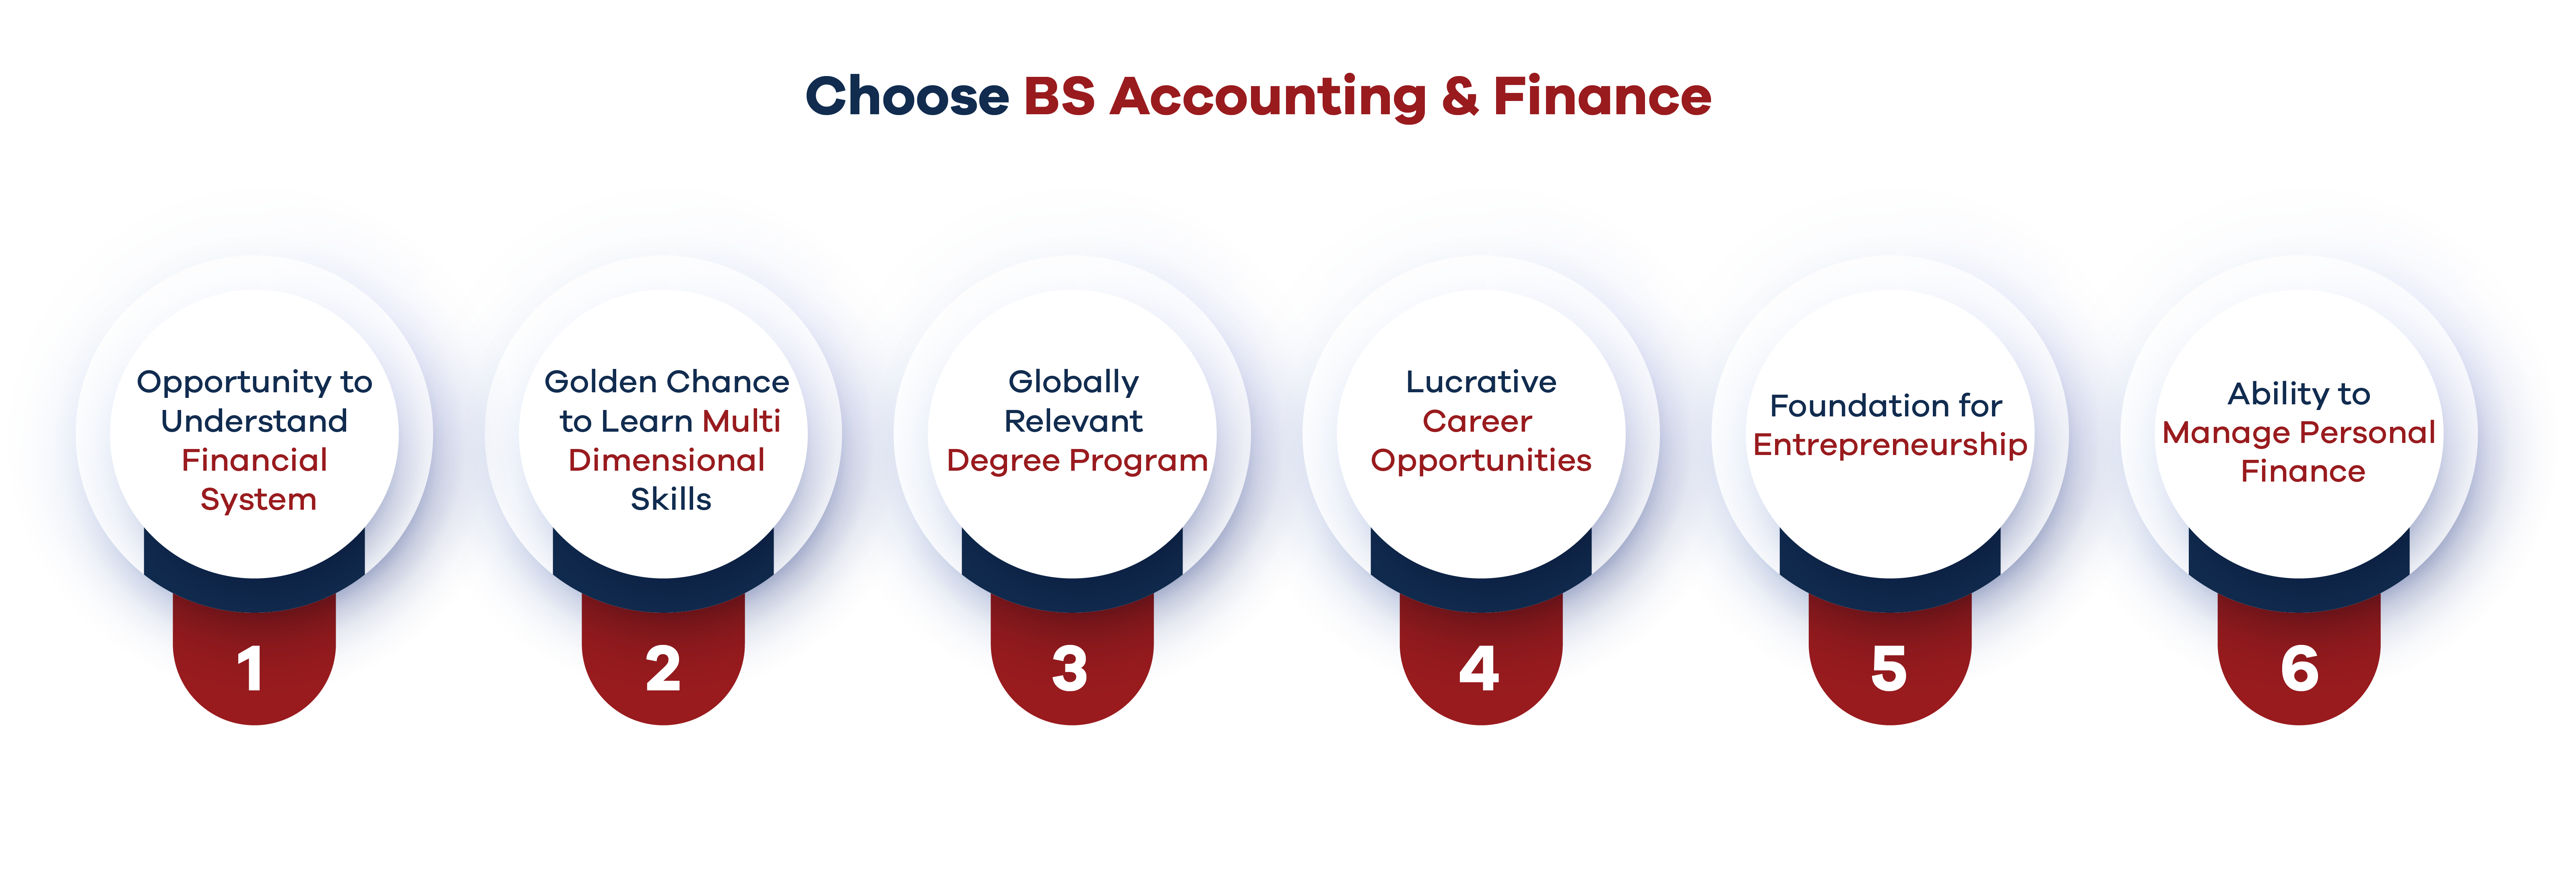 reasons to choose bs accounting & finance